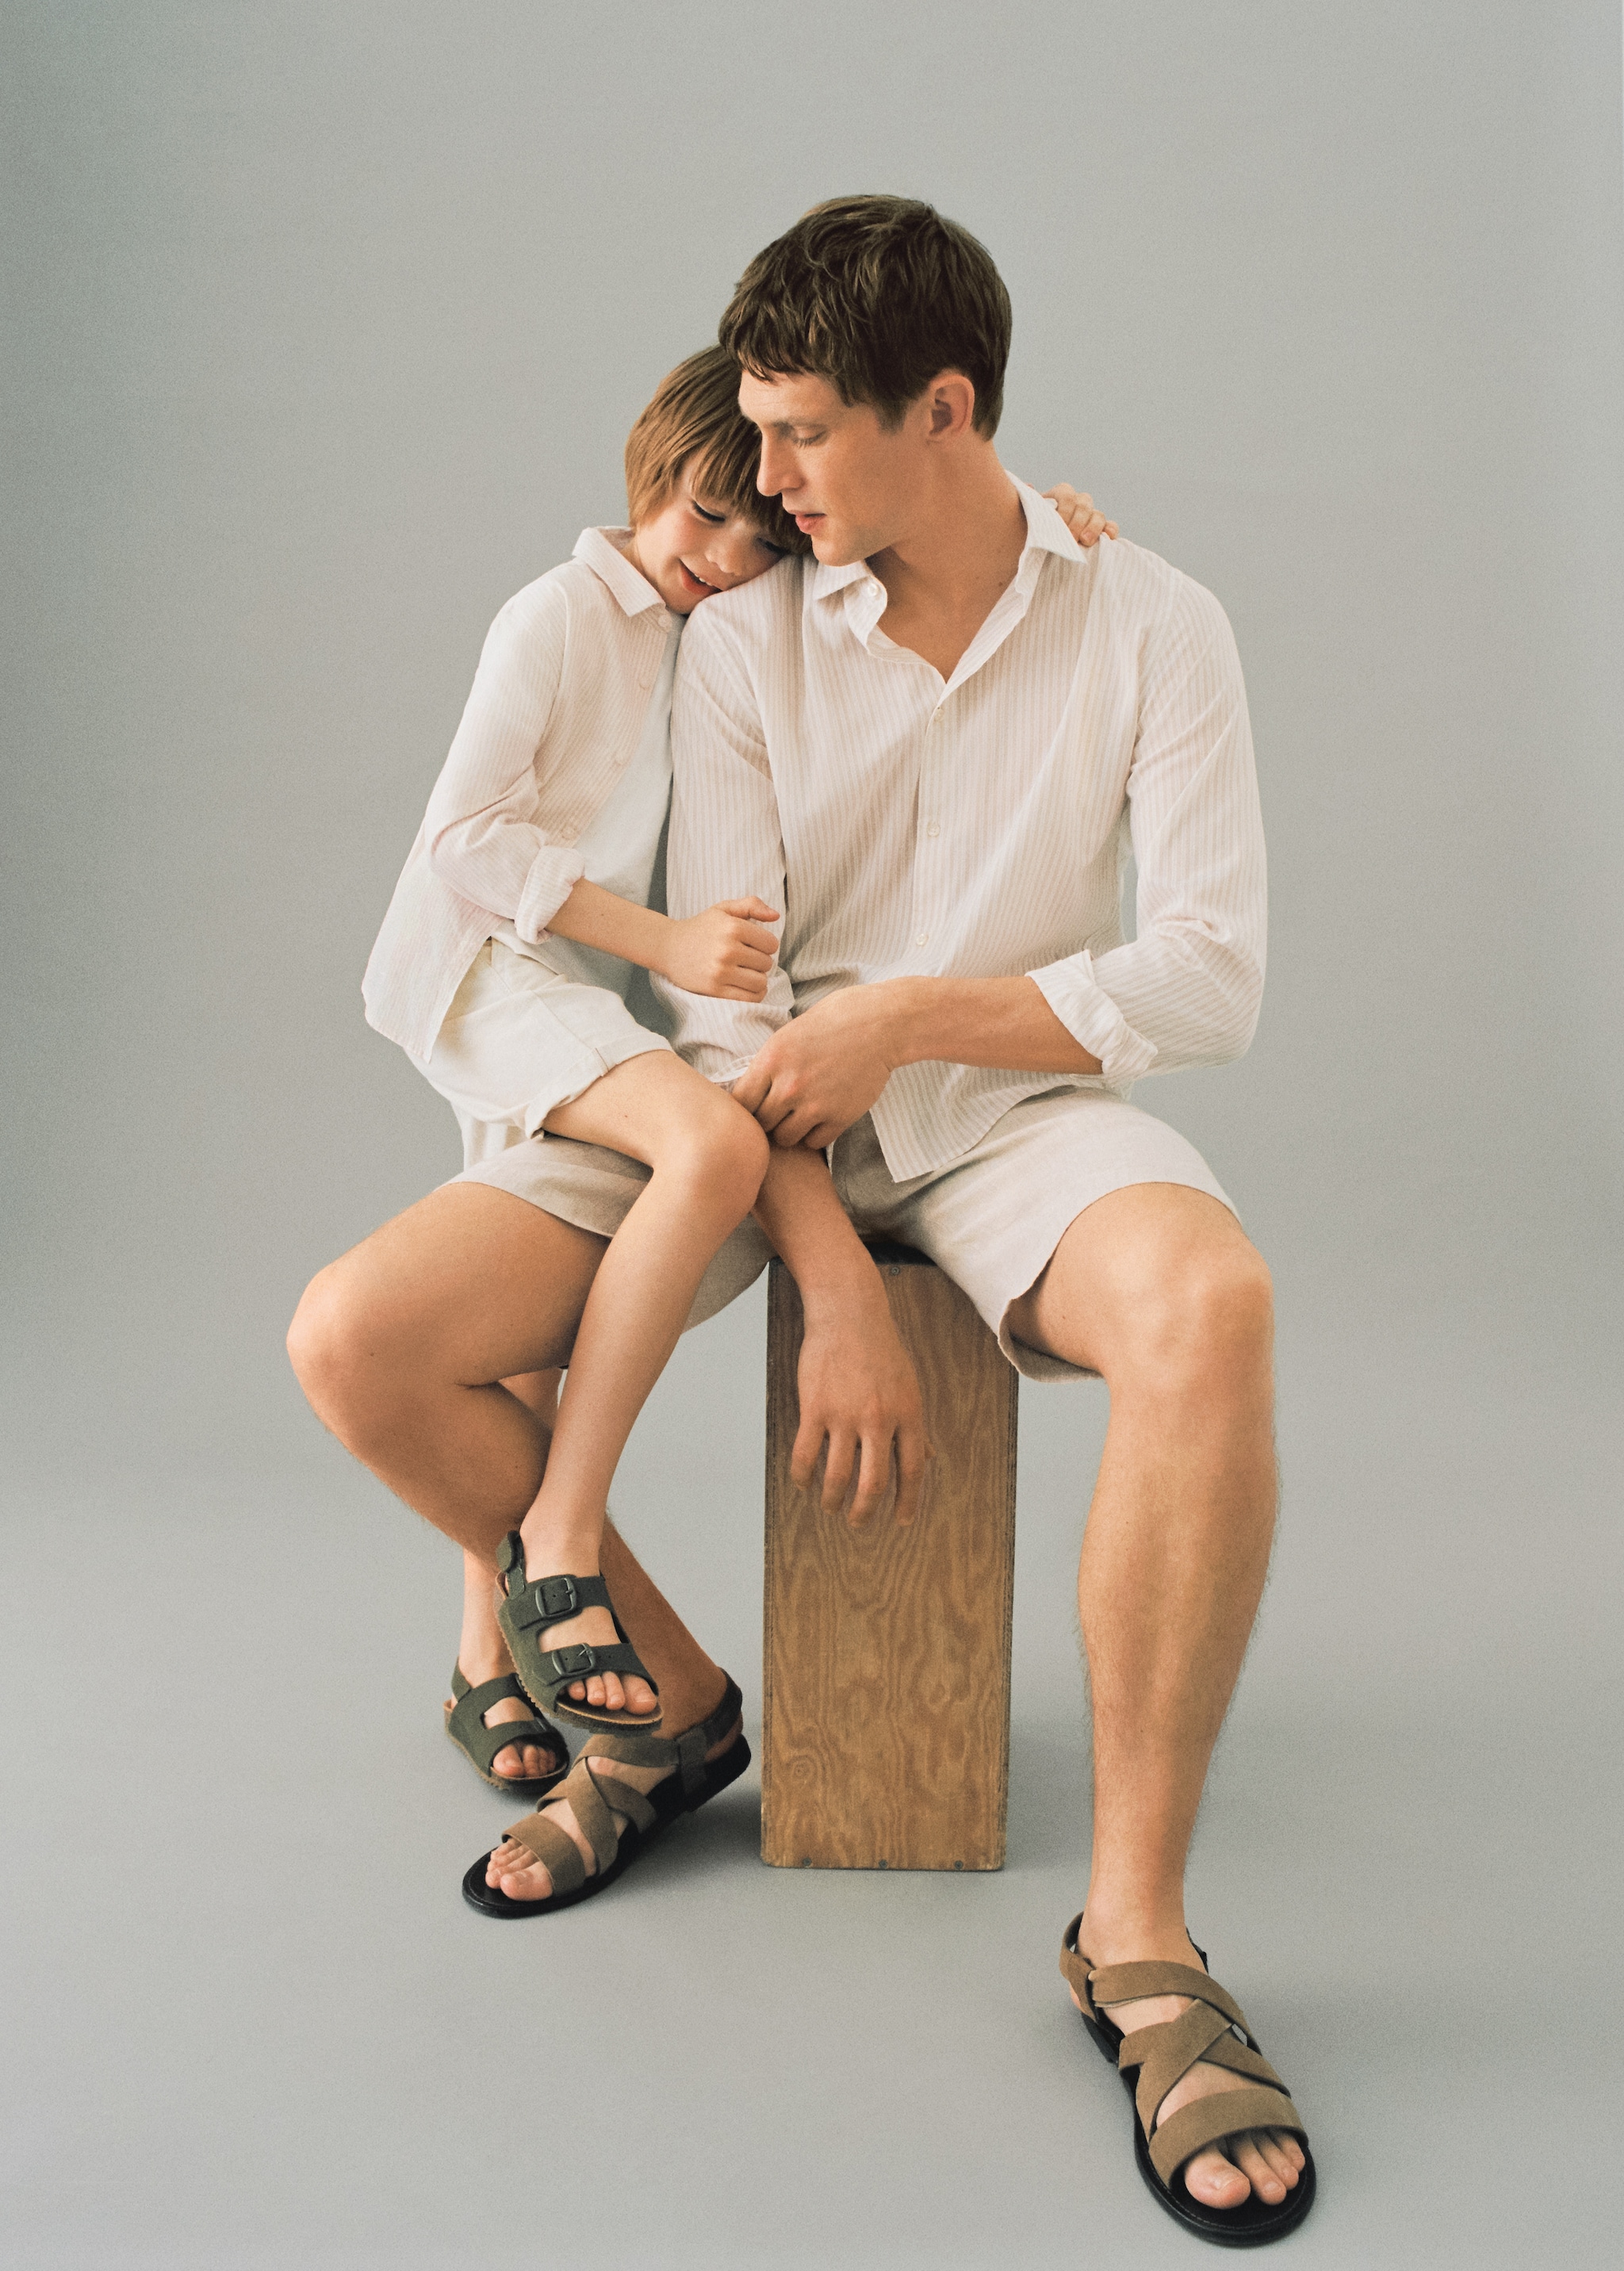 100% linen shorts - Details of the article 5